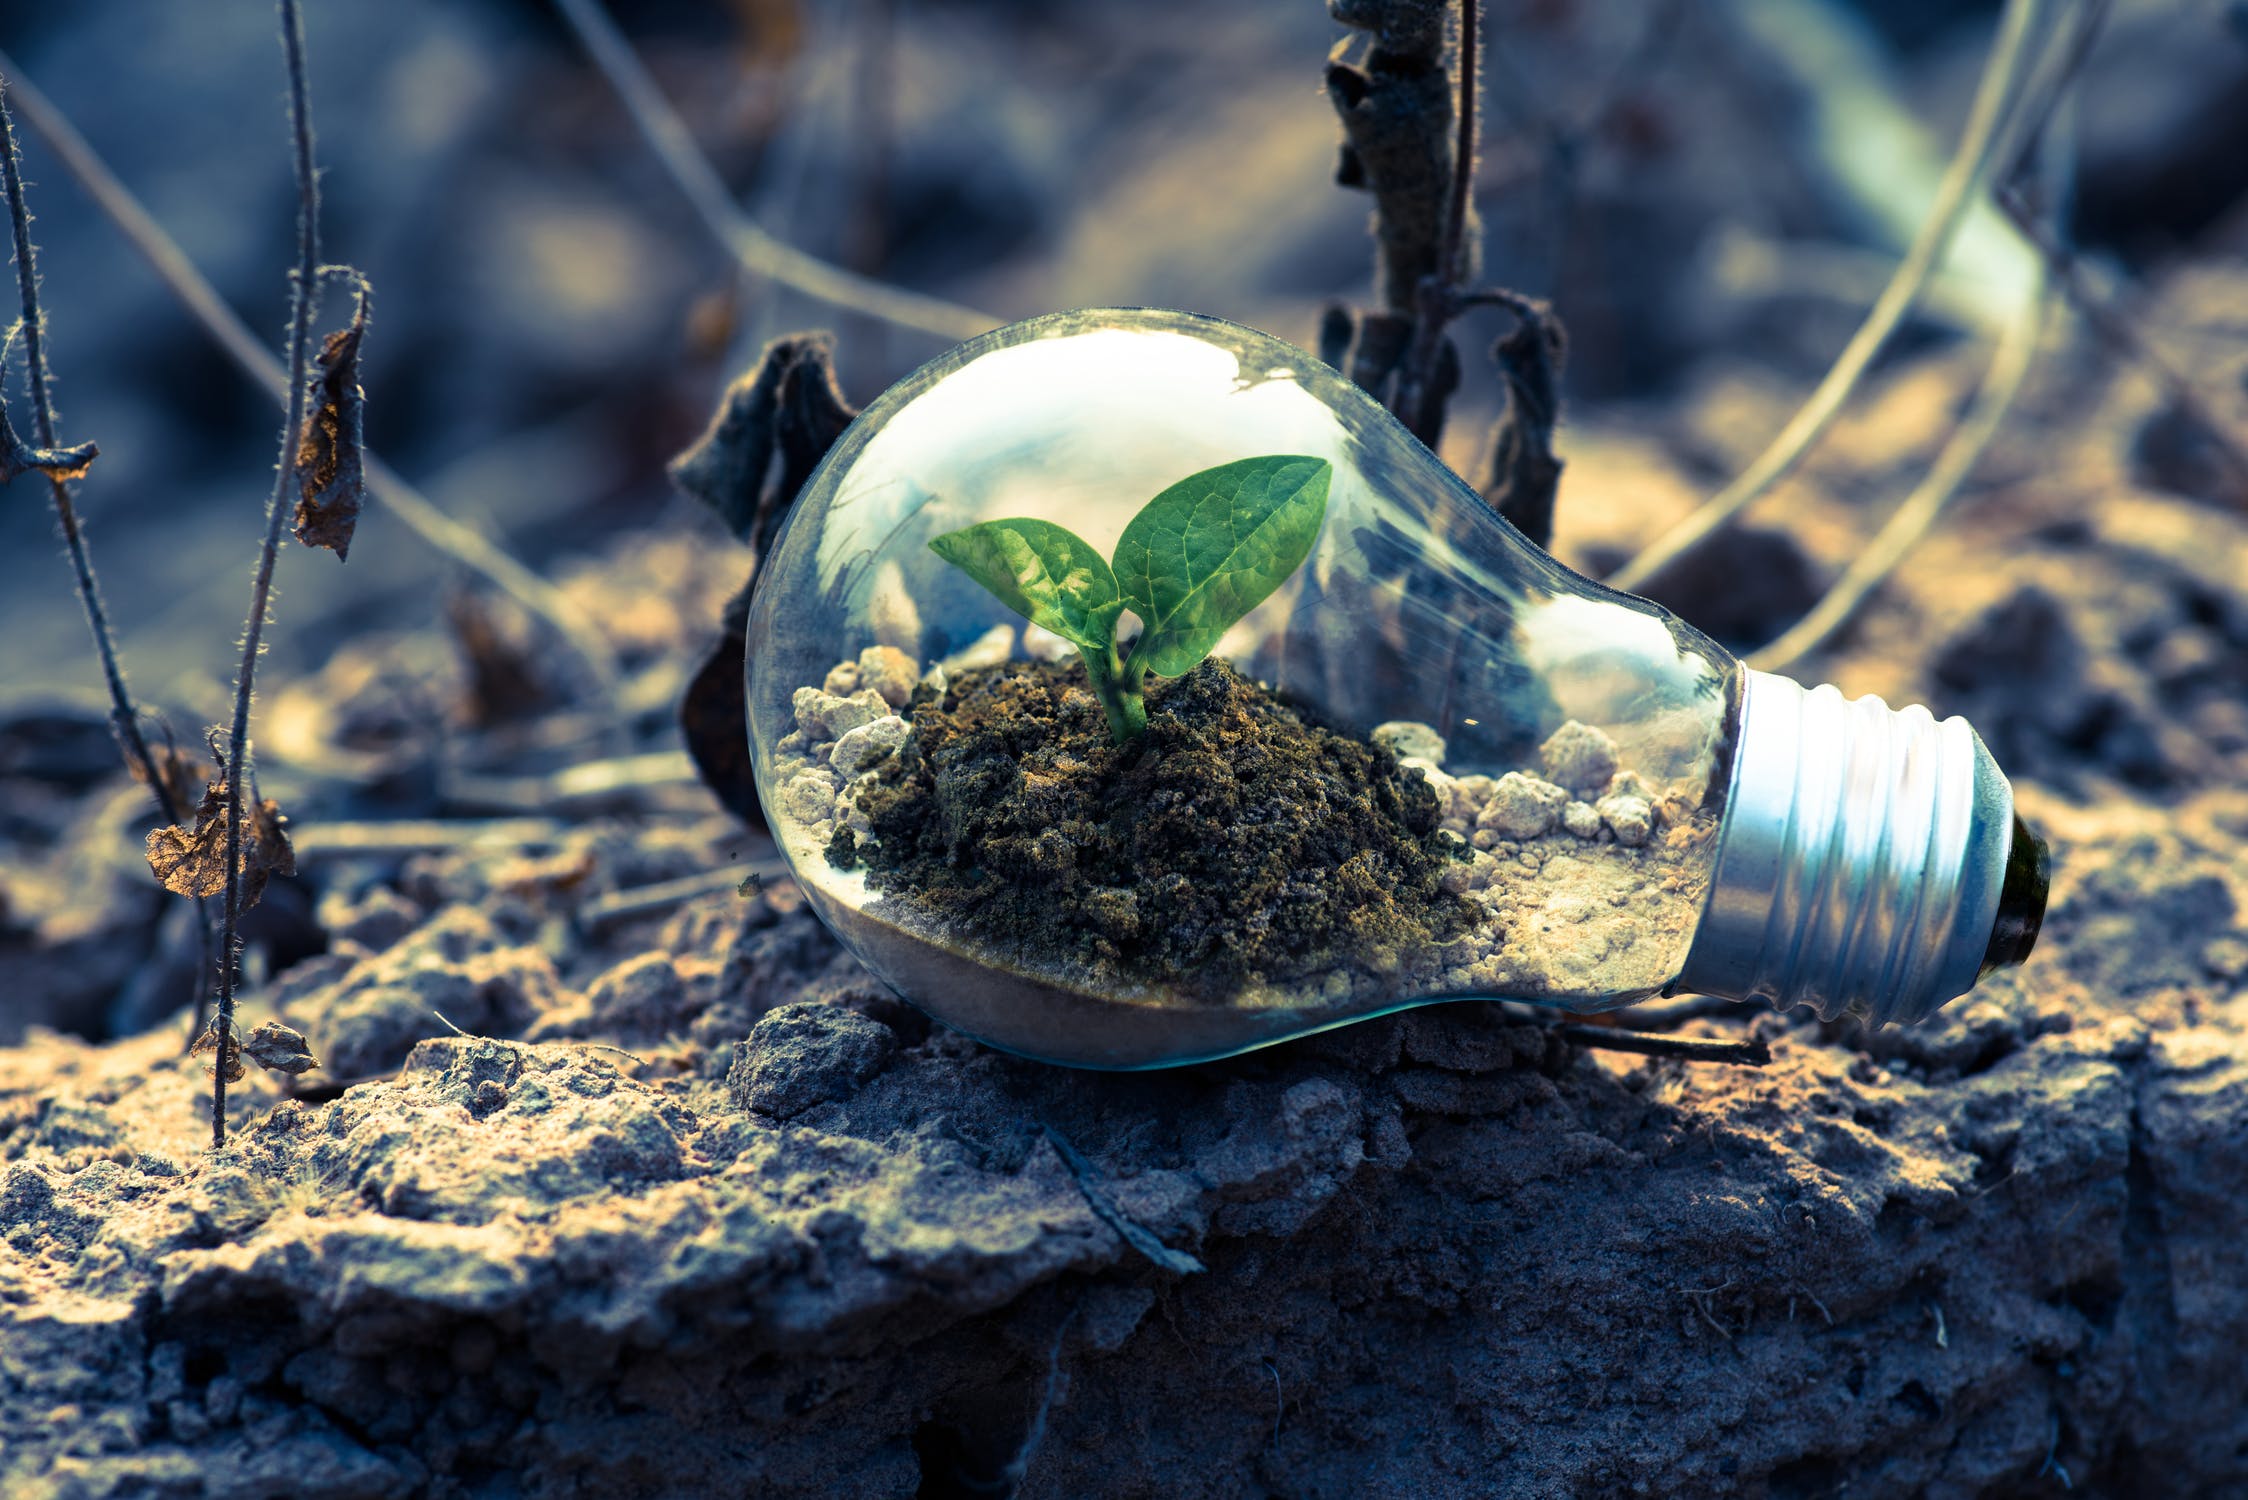 AN image of a lightbulb with a small plant growing inside. Photo by: Singkham / Pexels.com